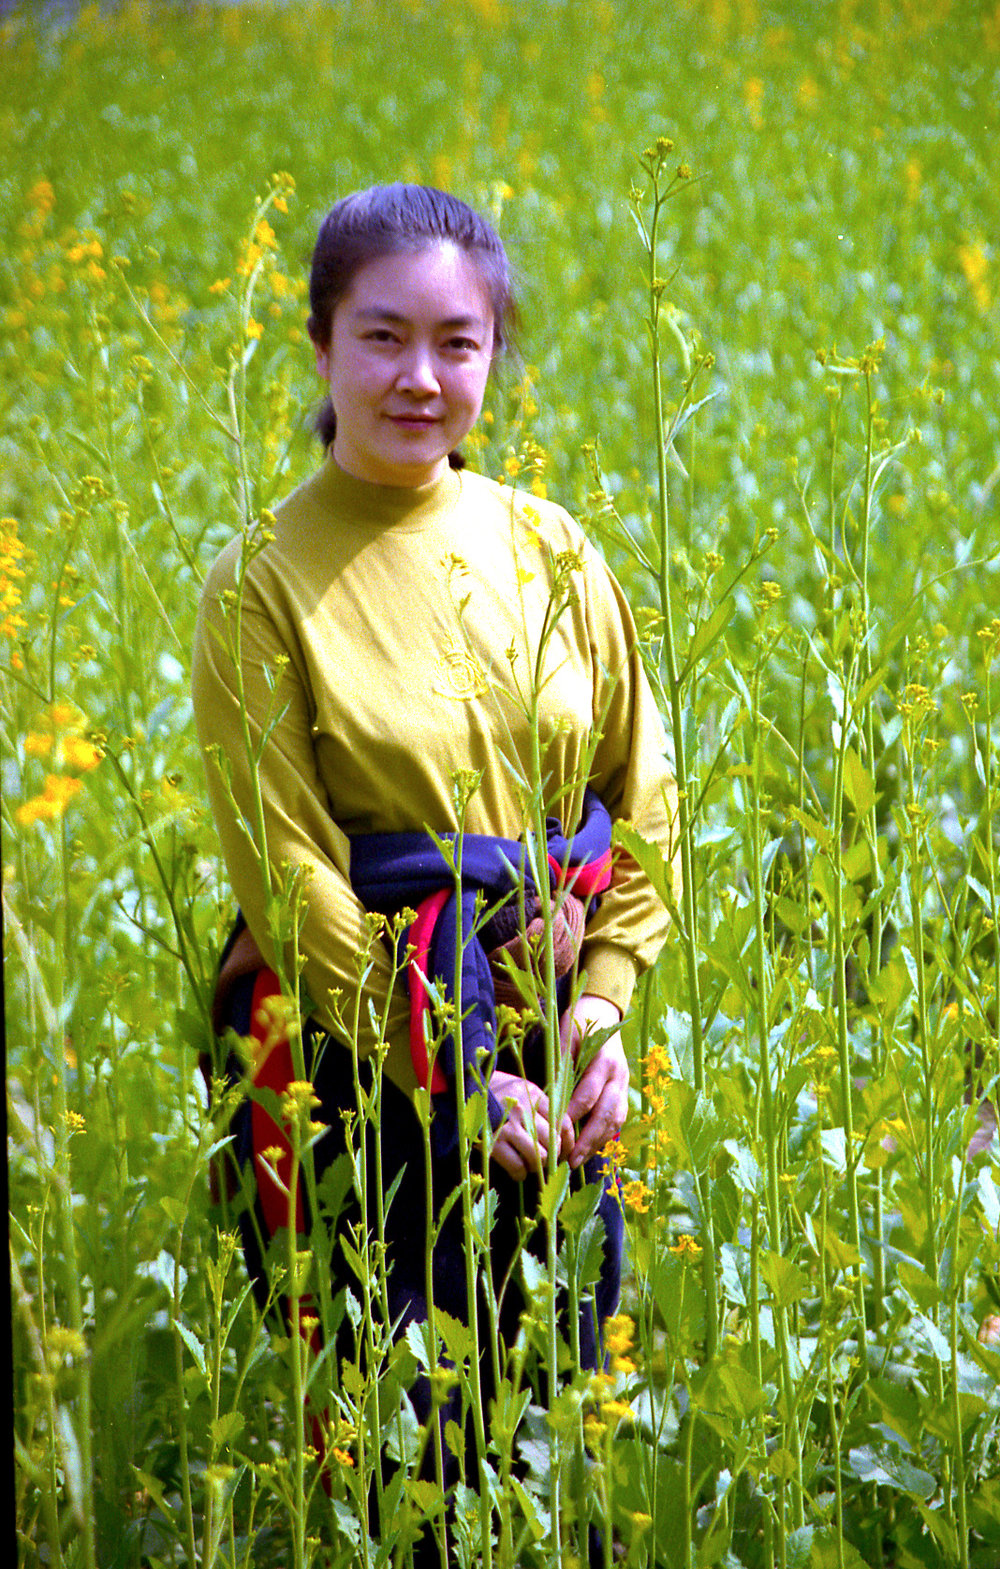 Jennifer at the suburb and Mianyang City, Sichuan Province, China in 1998. 曾錚1998年初攝於四川綿陽郊區。